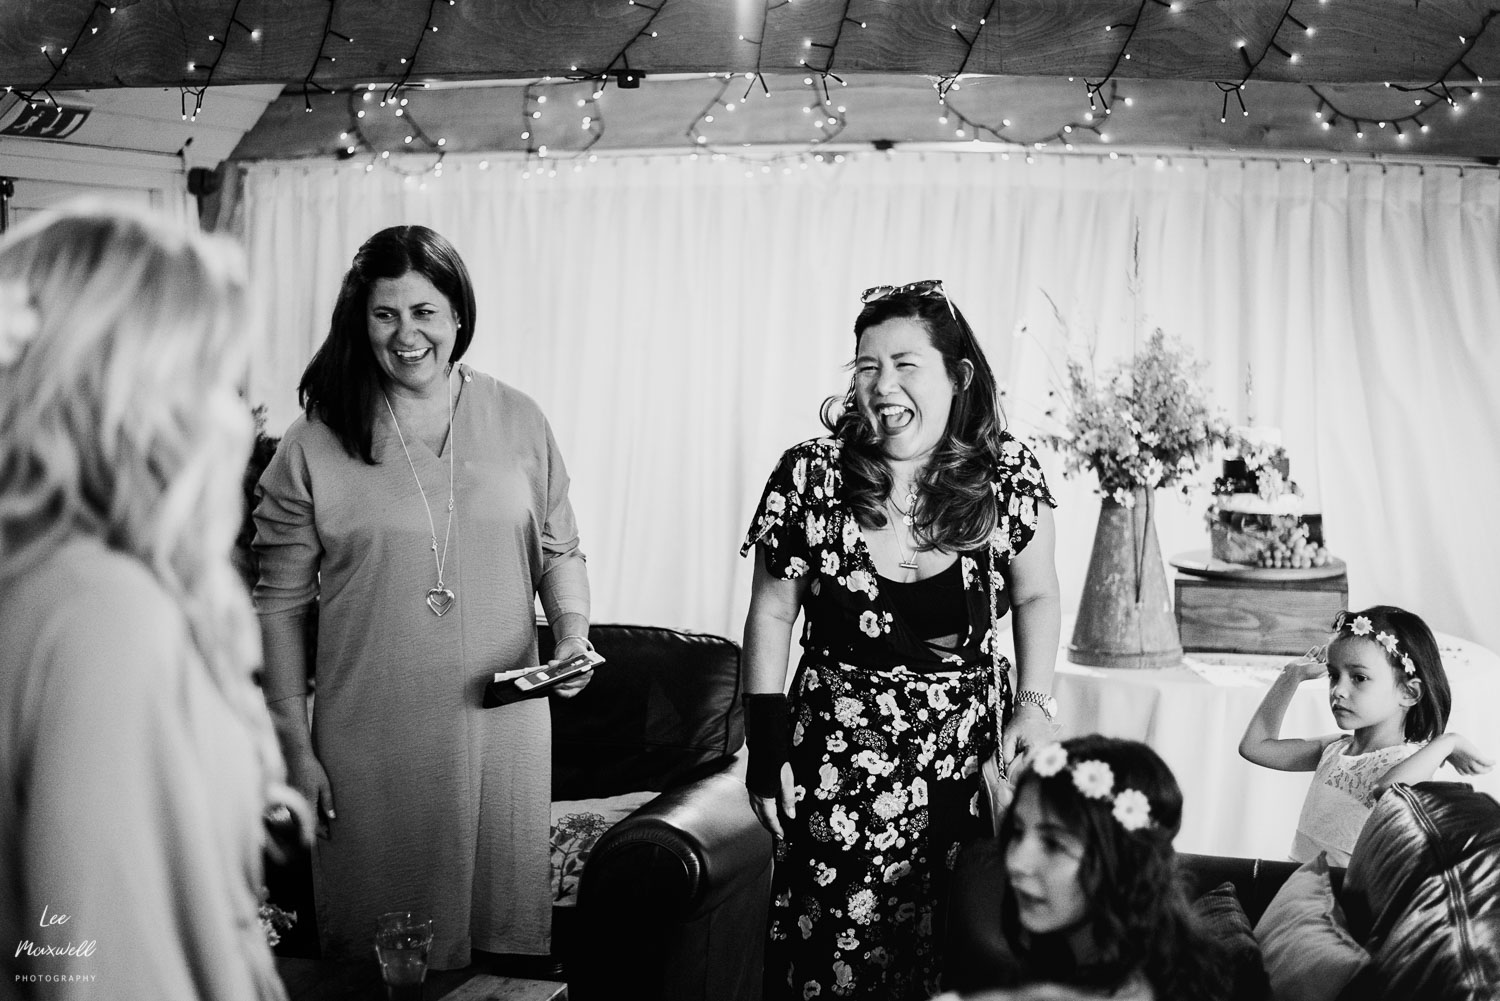 Laughing with the bride